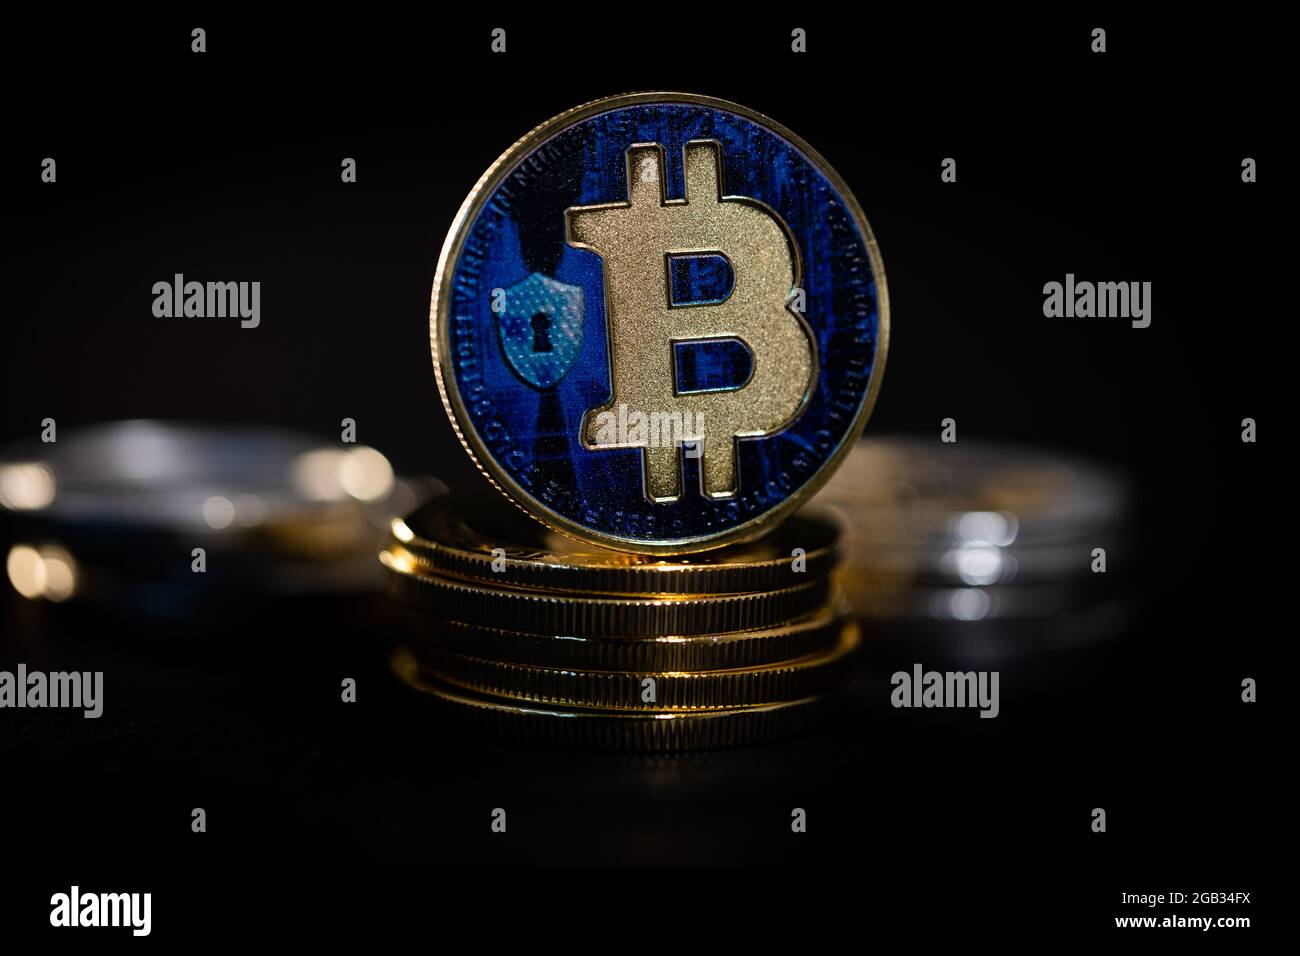 Bitcoin tokens amongst other cryptocurrency coins Stock Photo